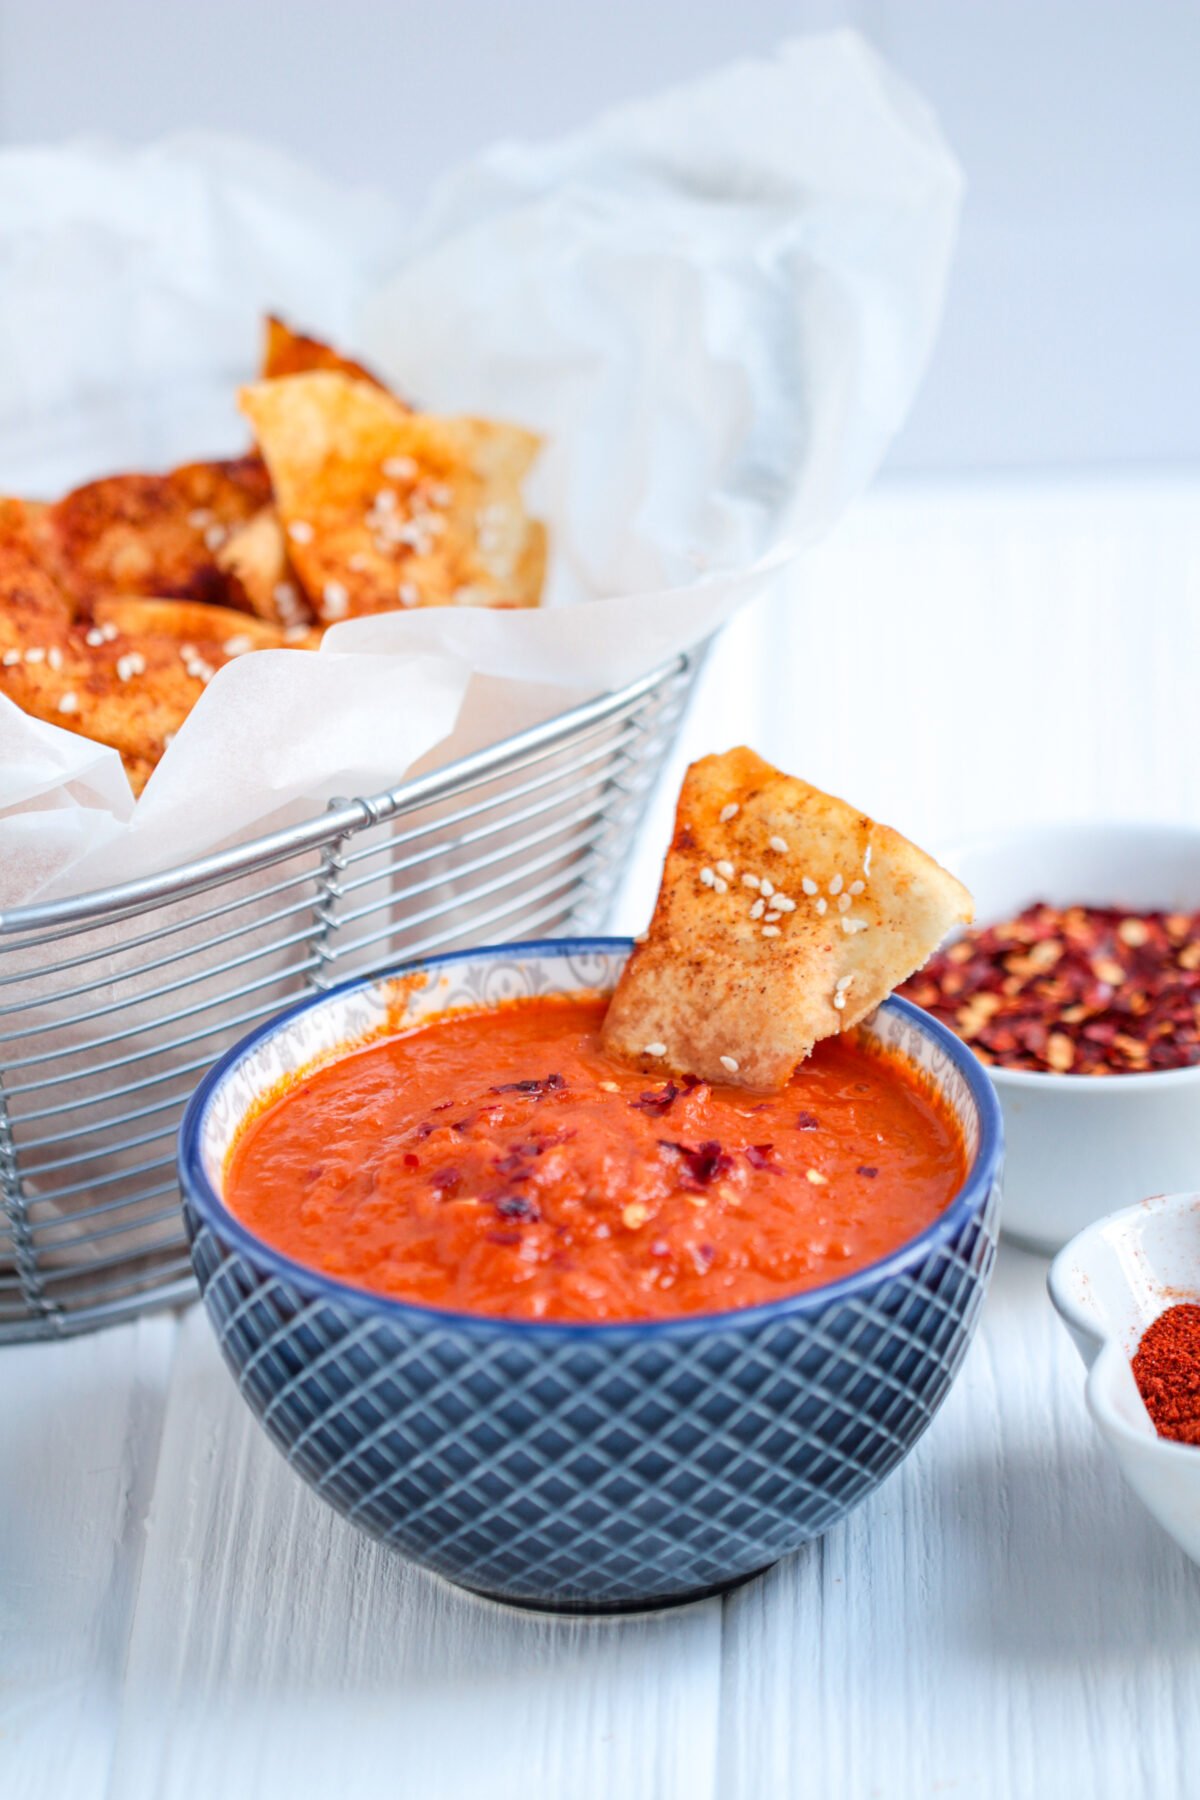 Smoky Spanish tomato dip, or salsa brava, is the perfect appetizer for your next party! Bravas sauce is full of flavour and easy to make!